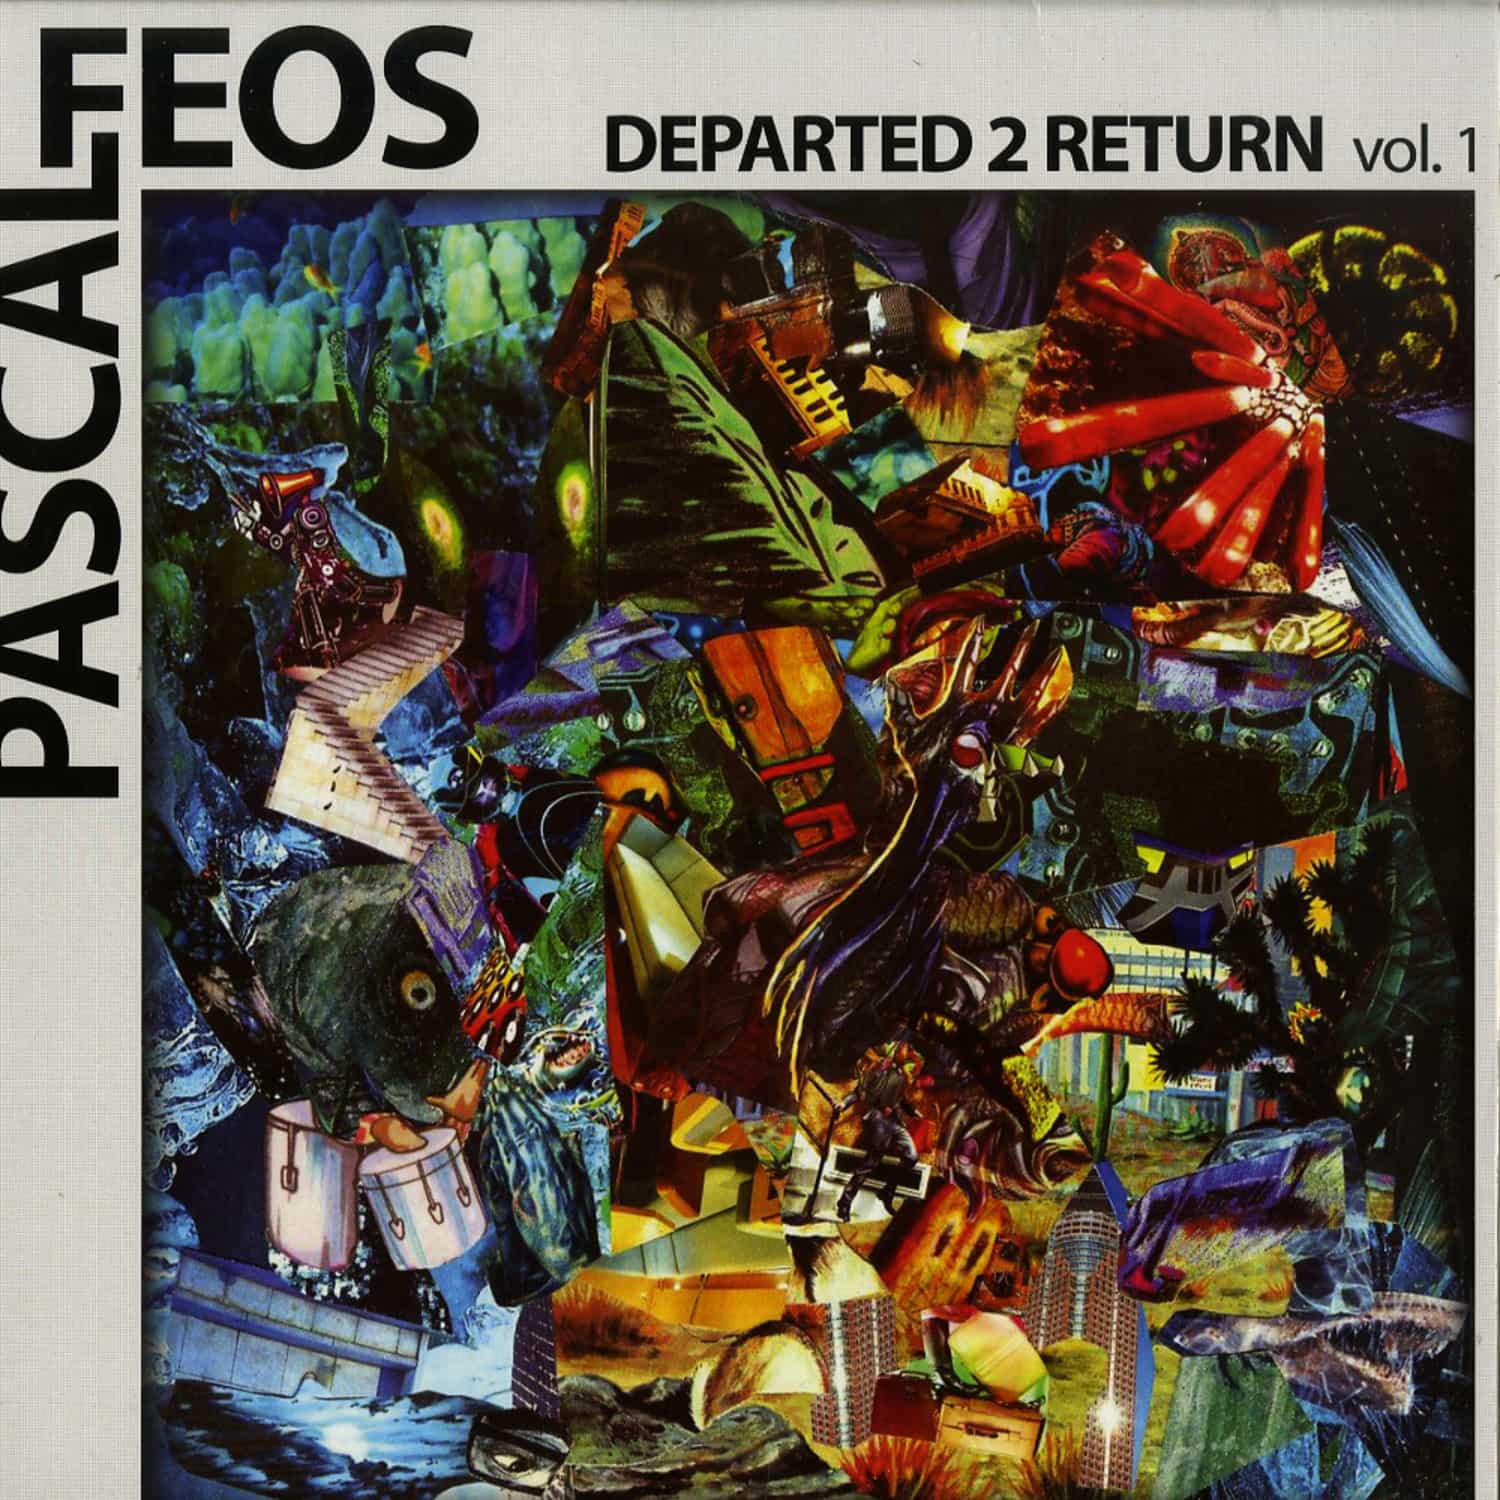 Pascal Feos - DEPARTED 2 RETURN PART 1 